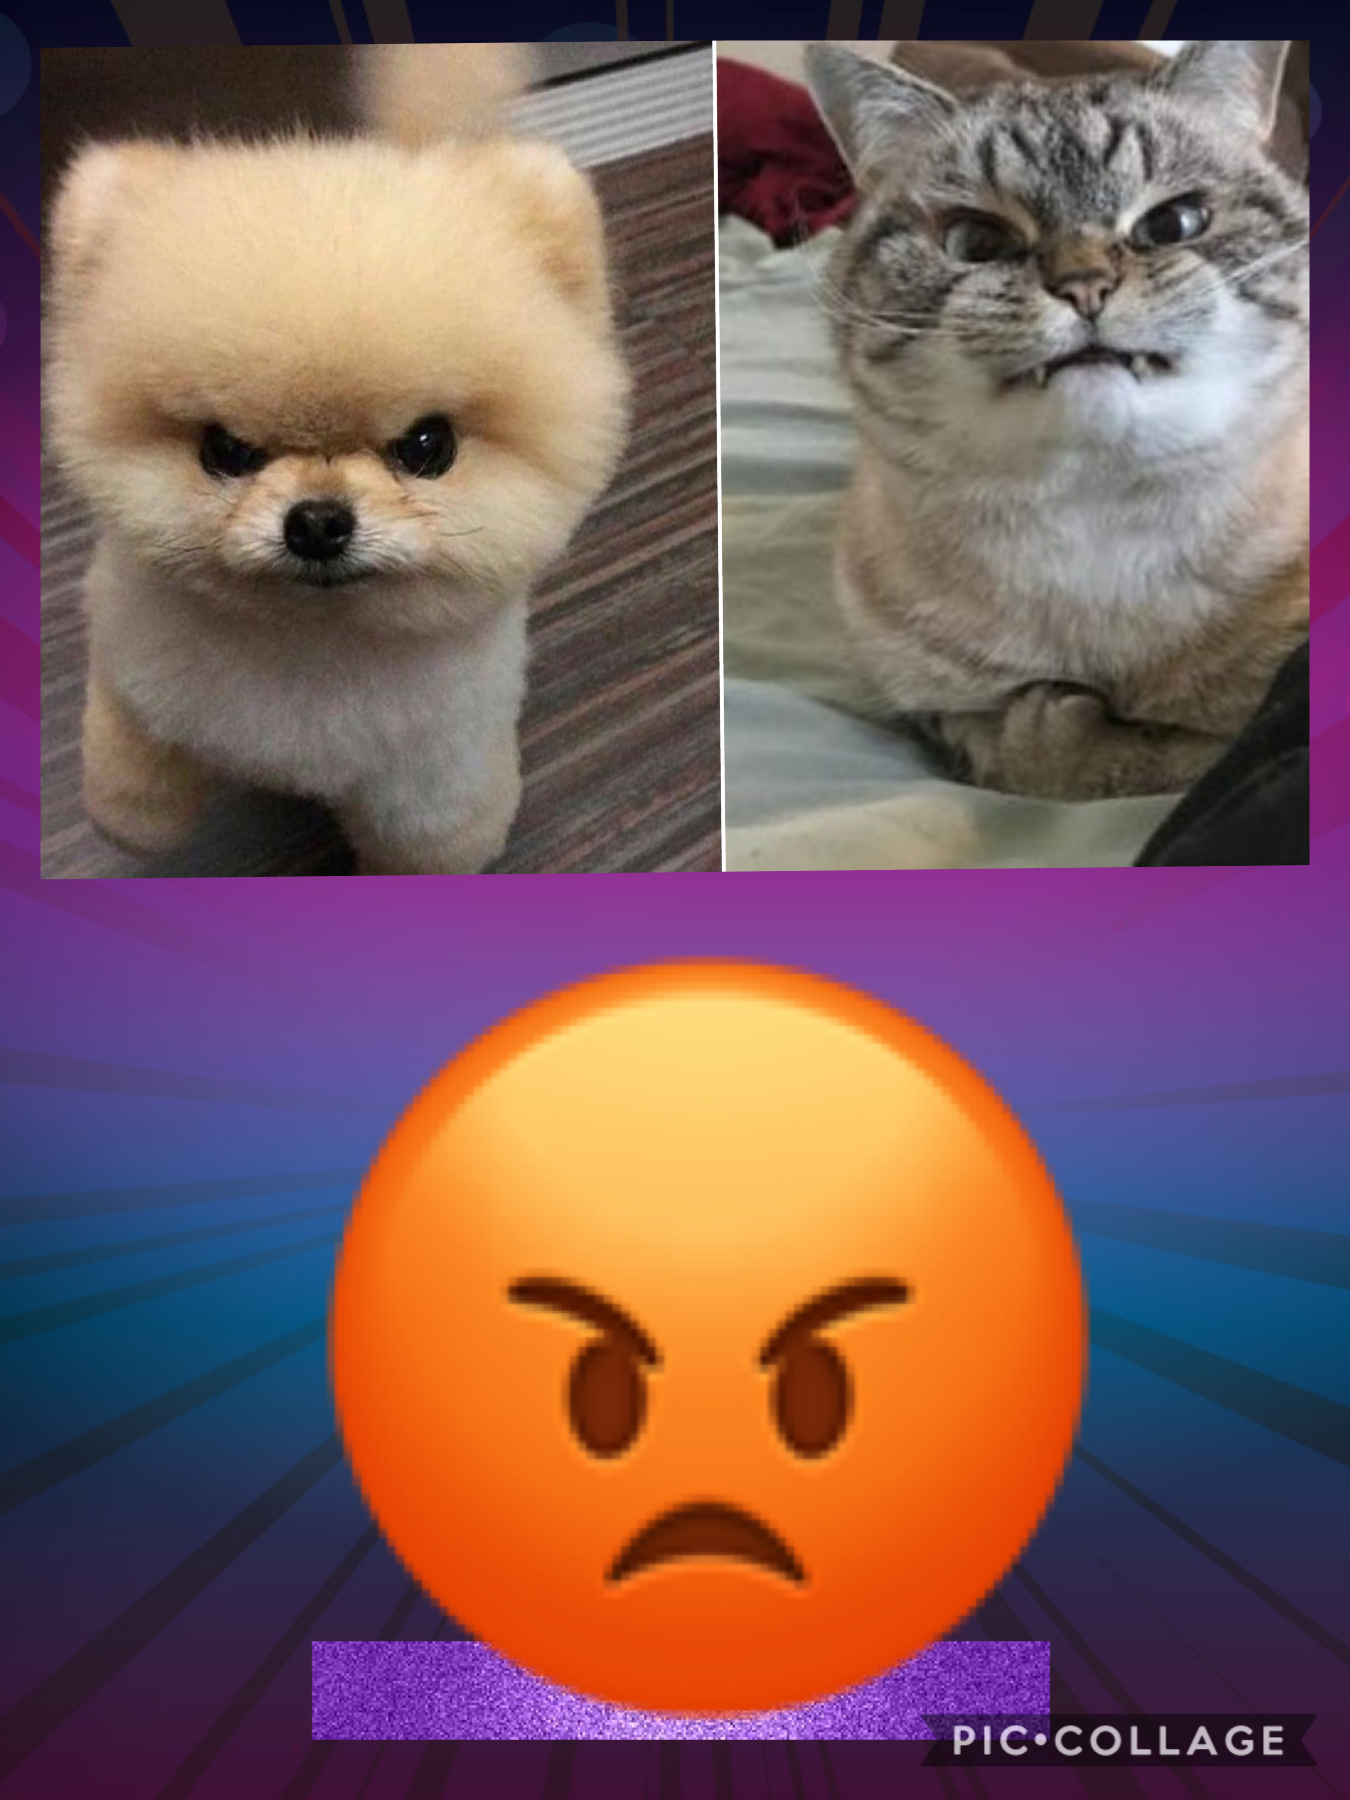 Angry animals... Lol it’s so cute 